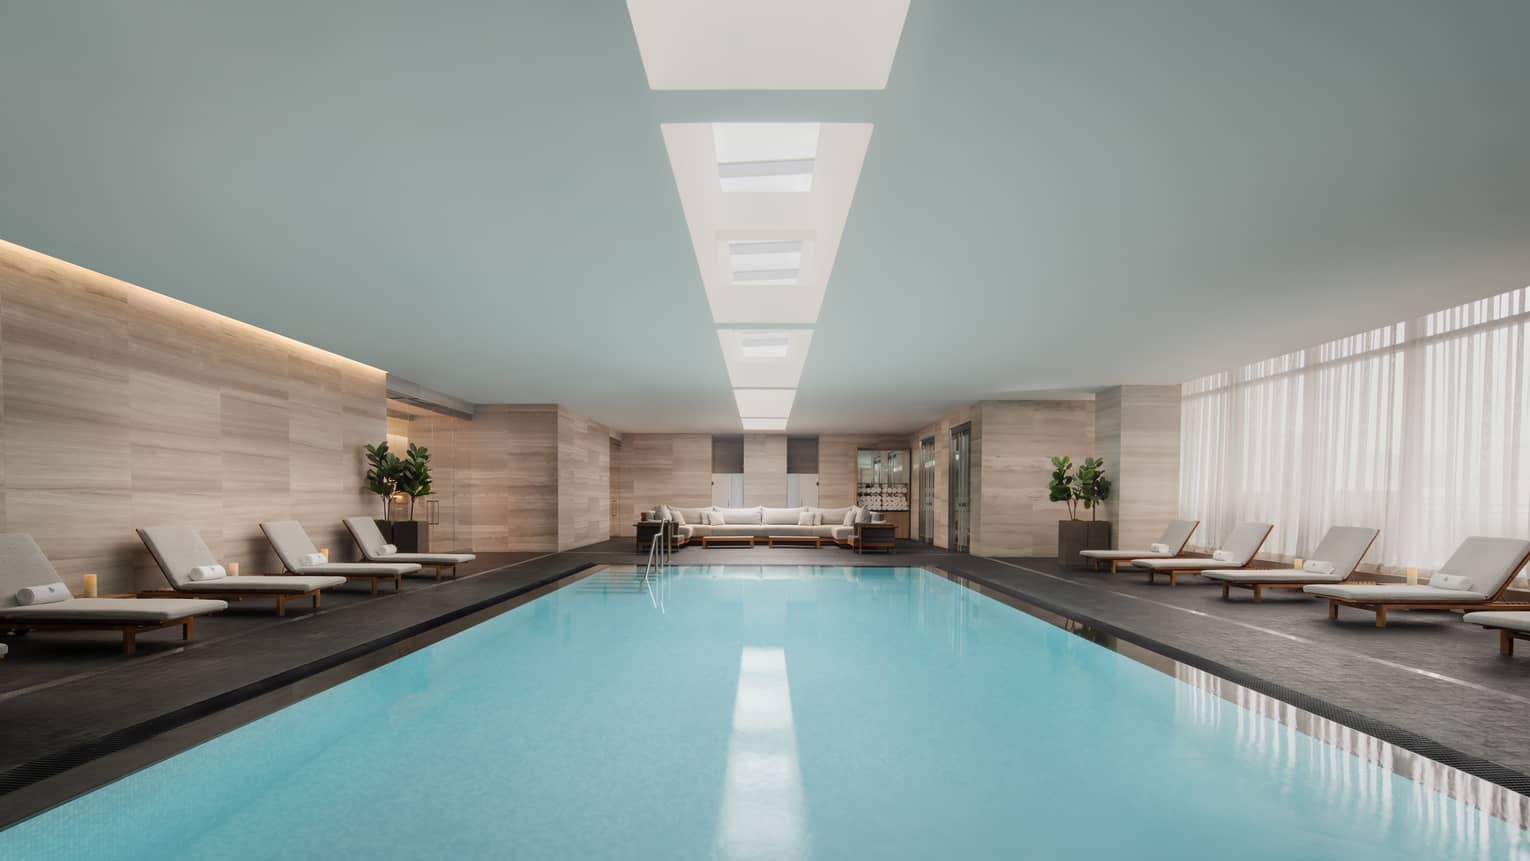 Expansive view of indoor pool lined with lounge chairs